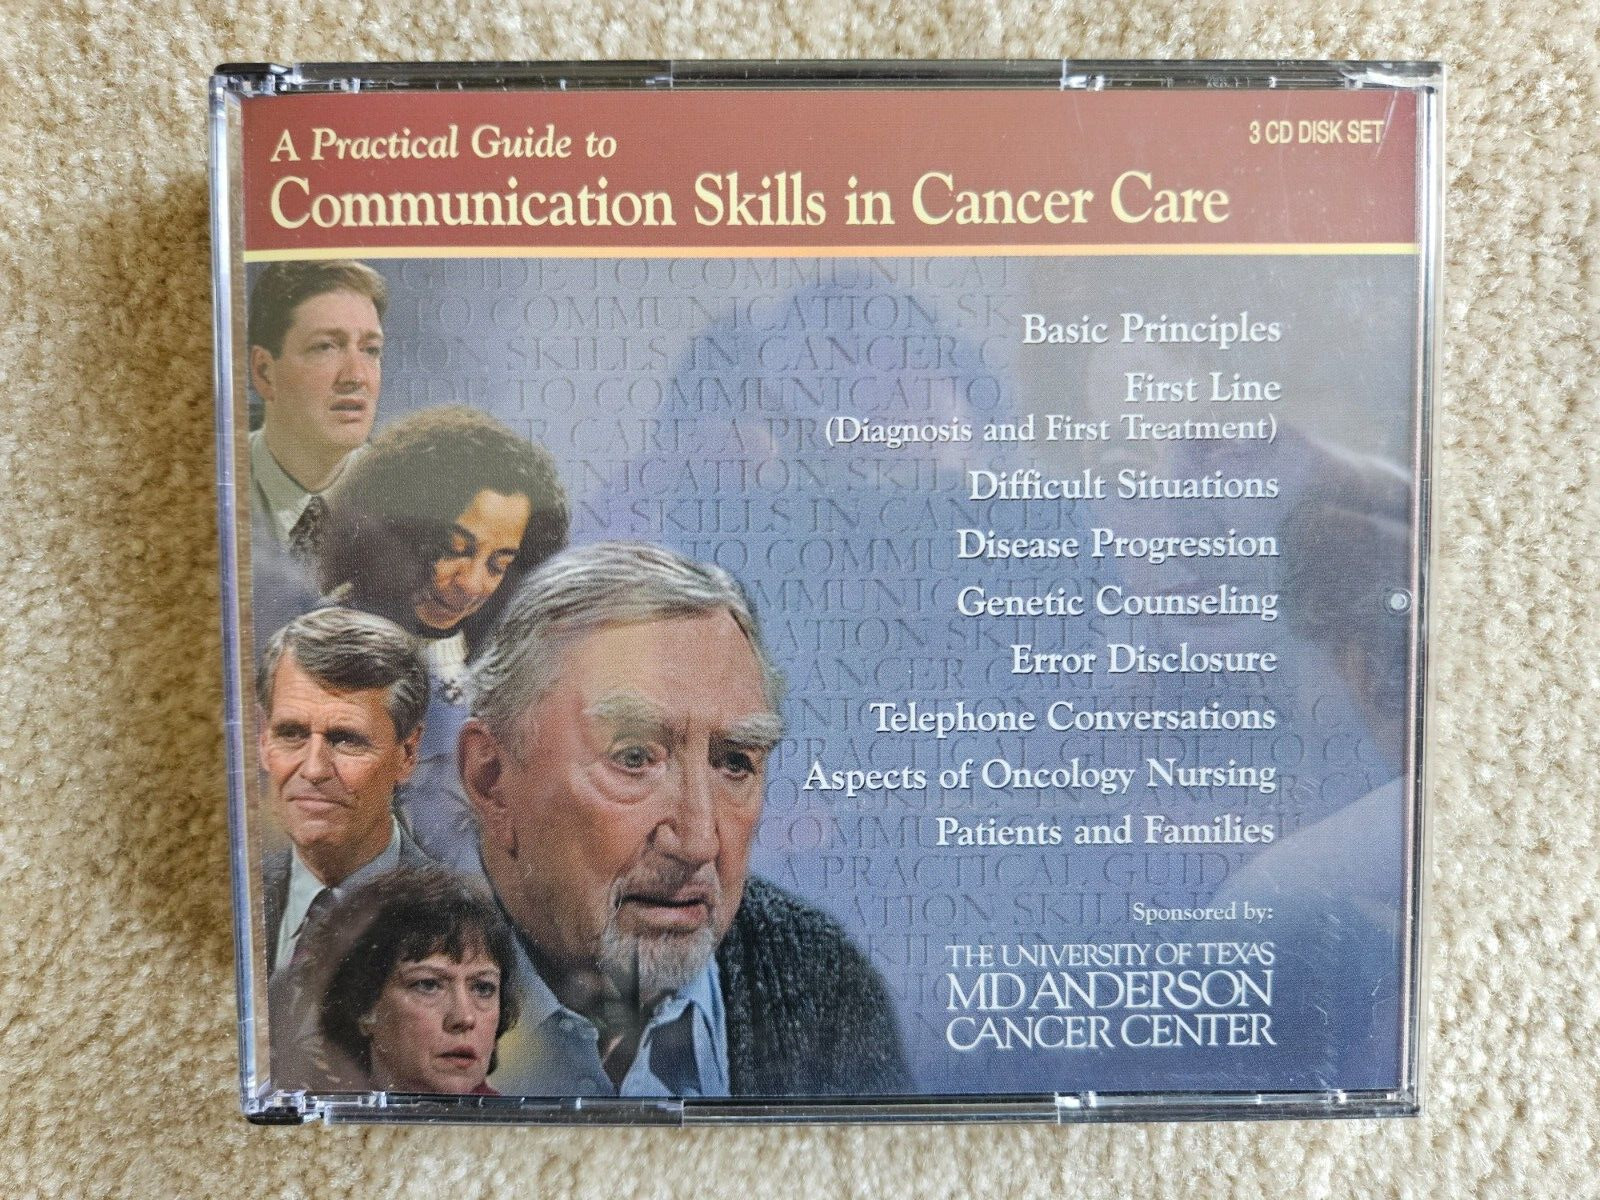 A Practical Guide to Communication Skills in Cancer Care CD-ROM 2001 3CD Set